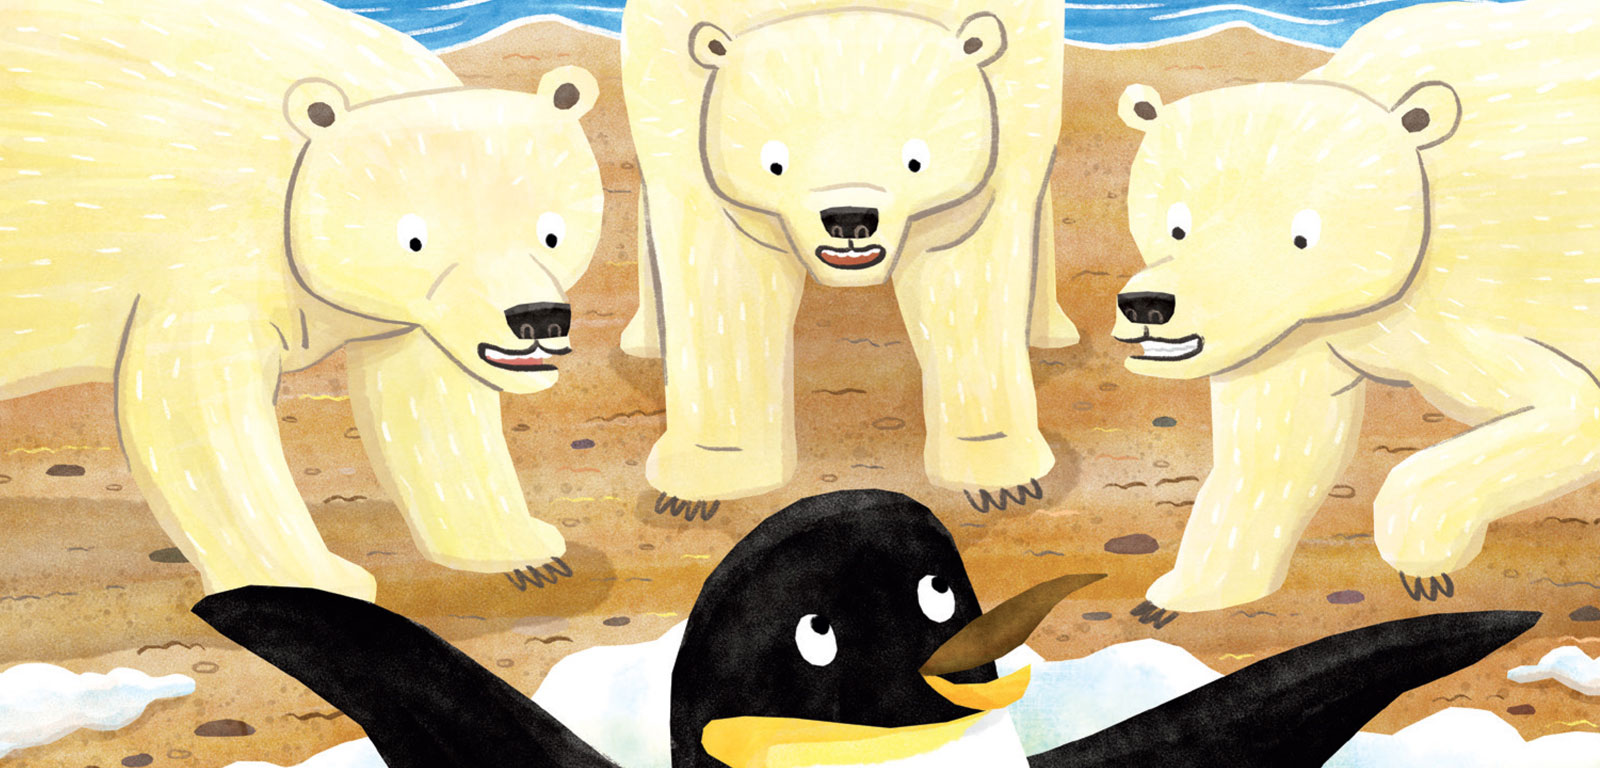 A detail from the cover illustration by Marcus Cutler for the book Dear Polar Bears